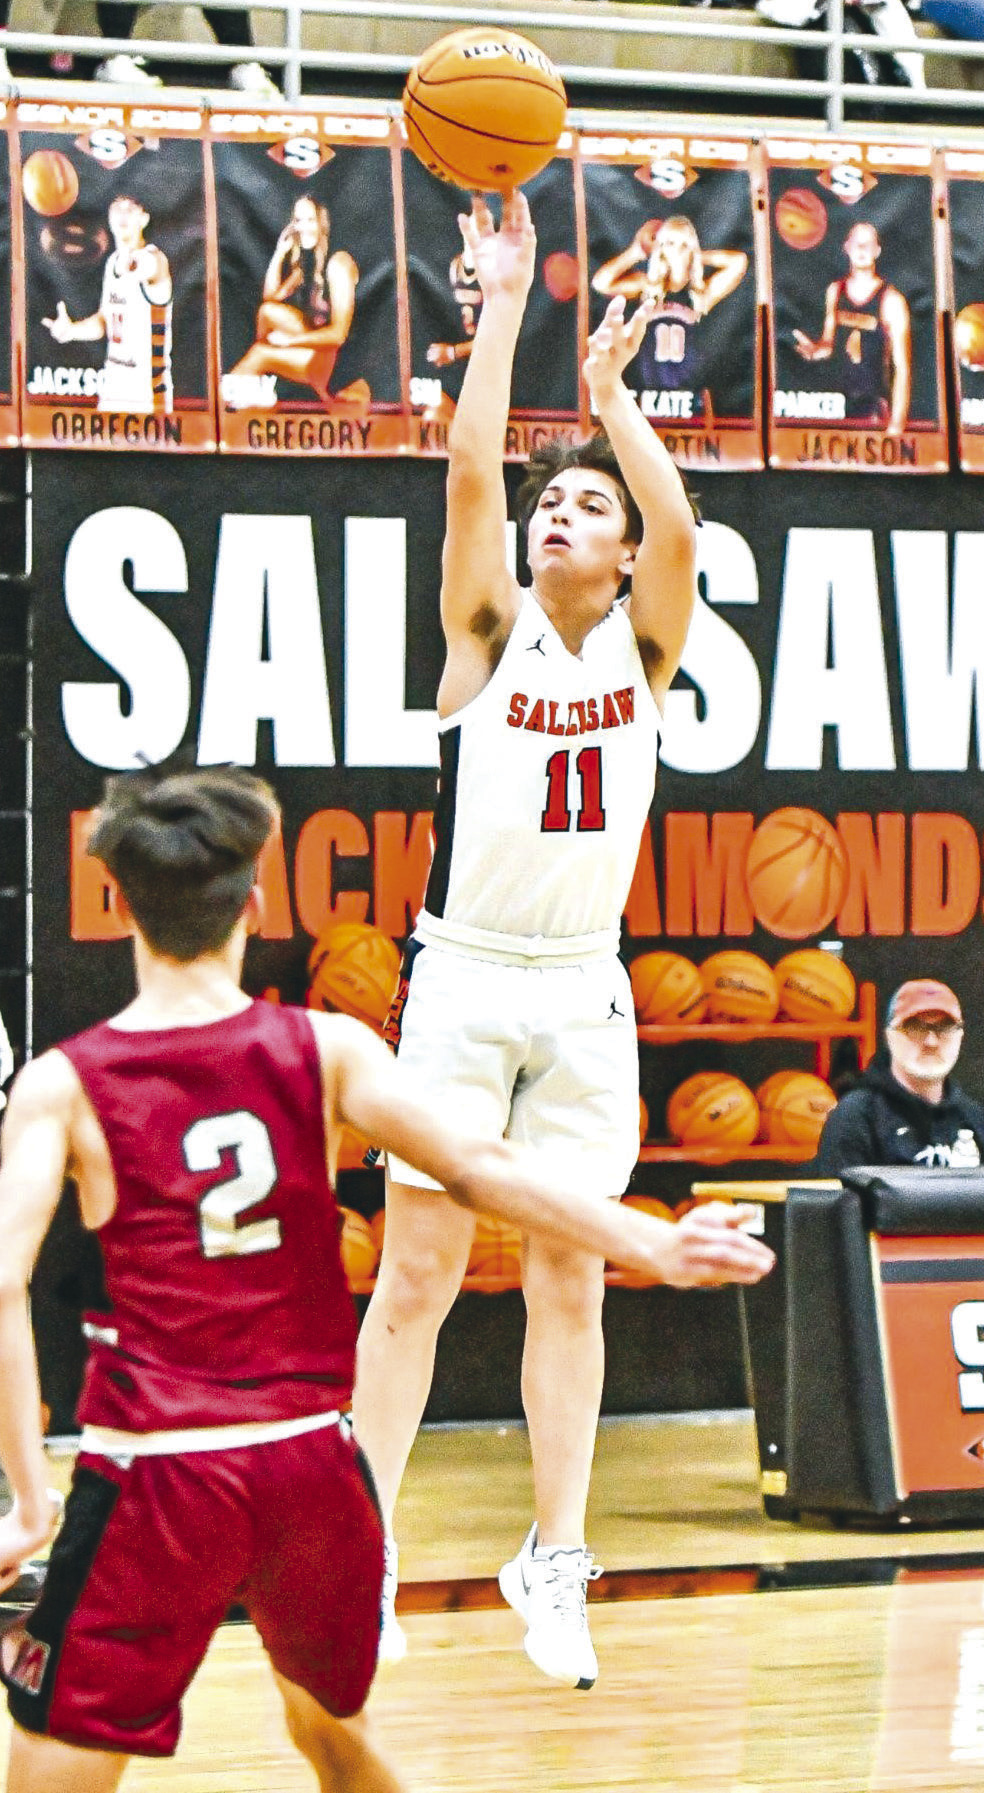 Sallisaw’s Jackson Obregon makes a three-pointer over the heads of Muldrow defenders during a classic cross-county Class 4A game Friday at Paul Post Fieldhouse in the Black Diamonds’ 62-56 loss. JIM CAMERON •TIMES